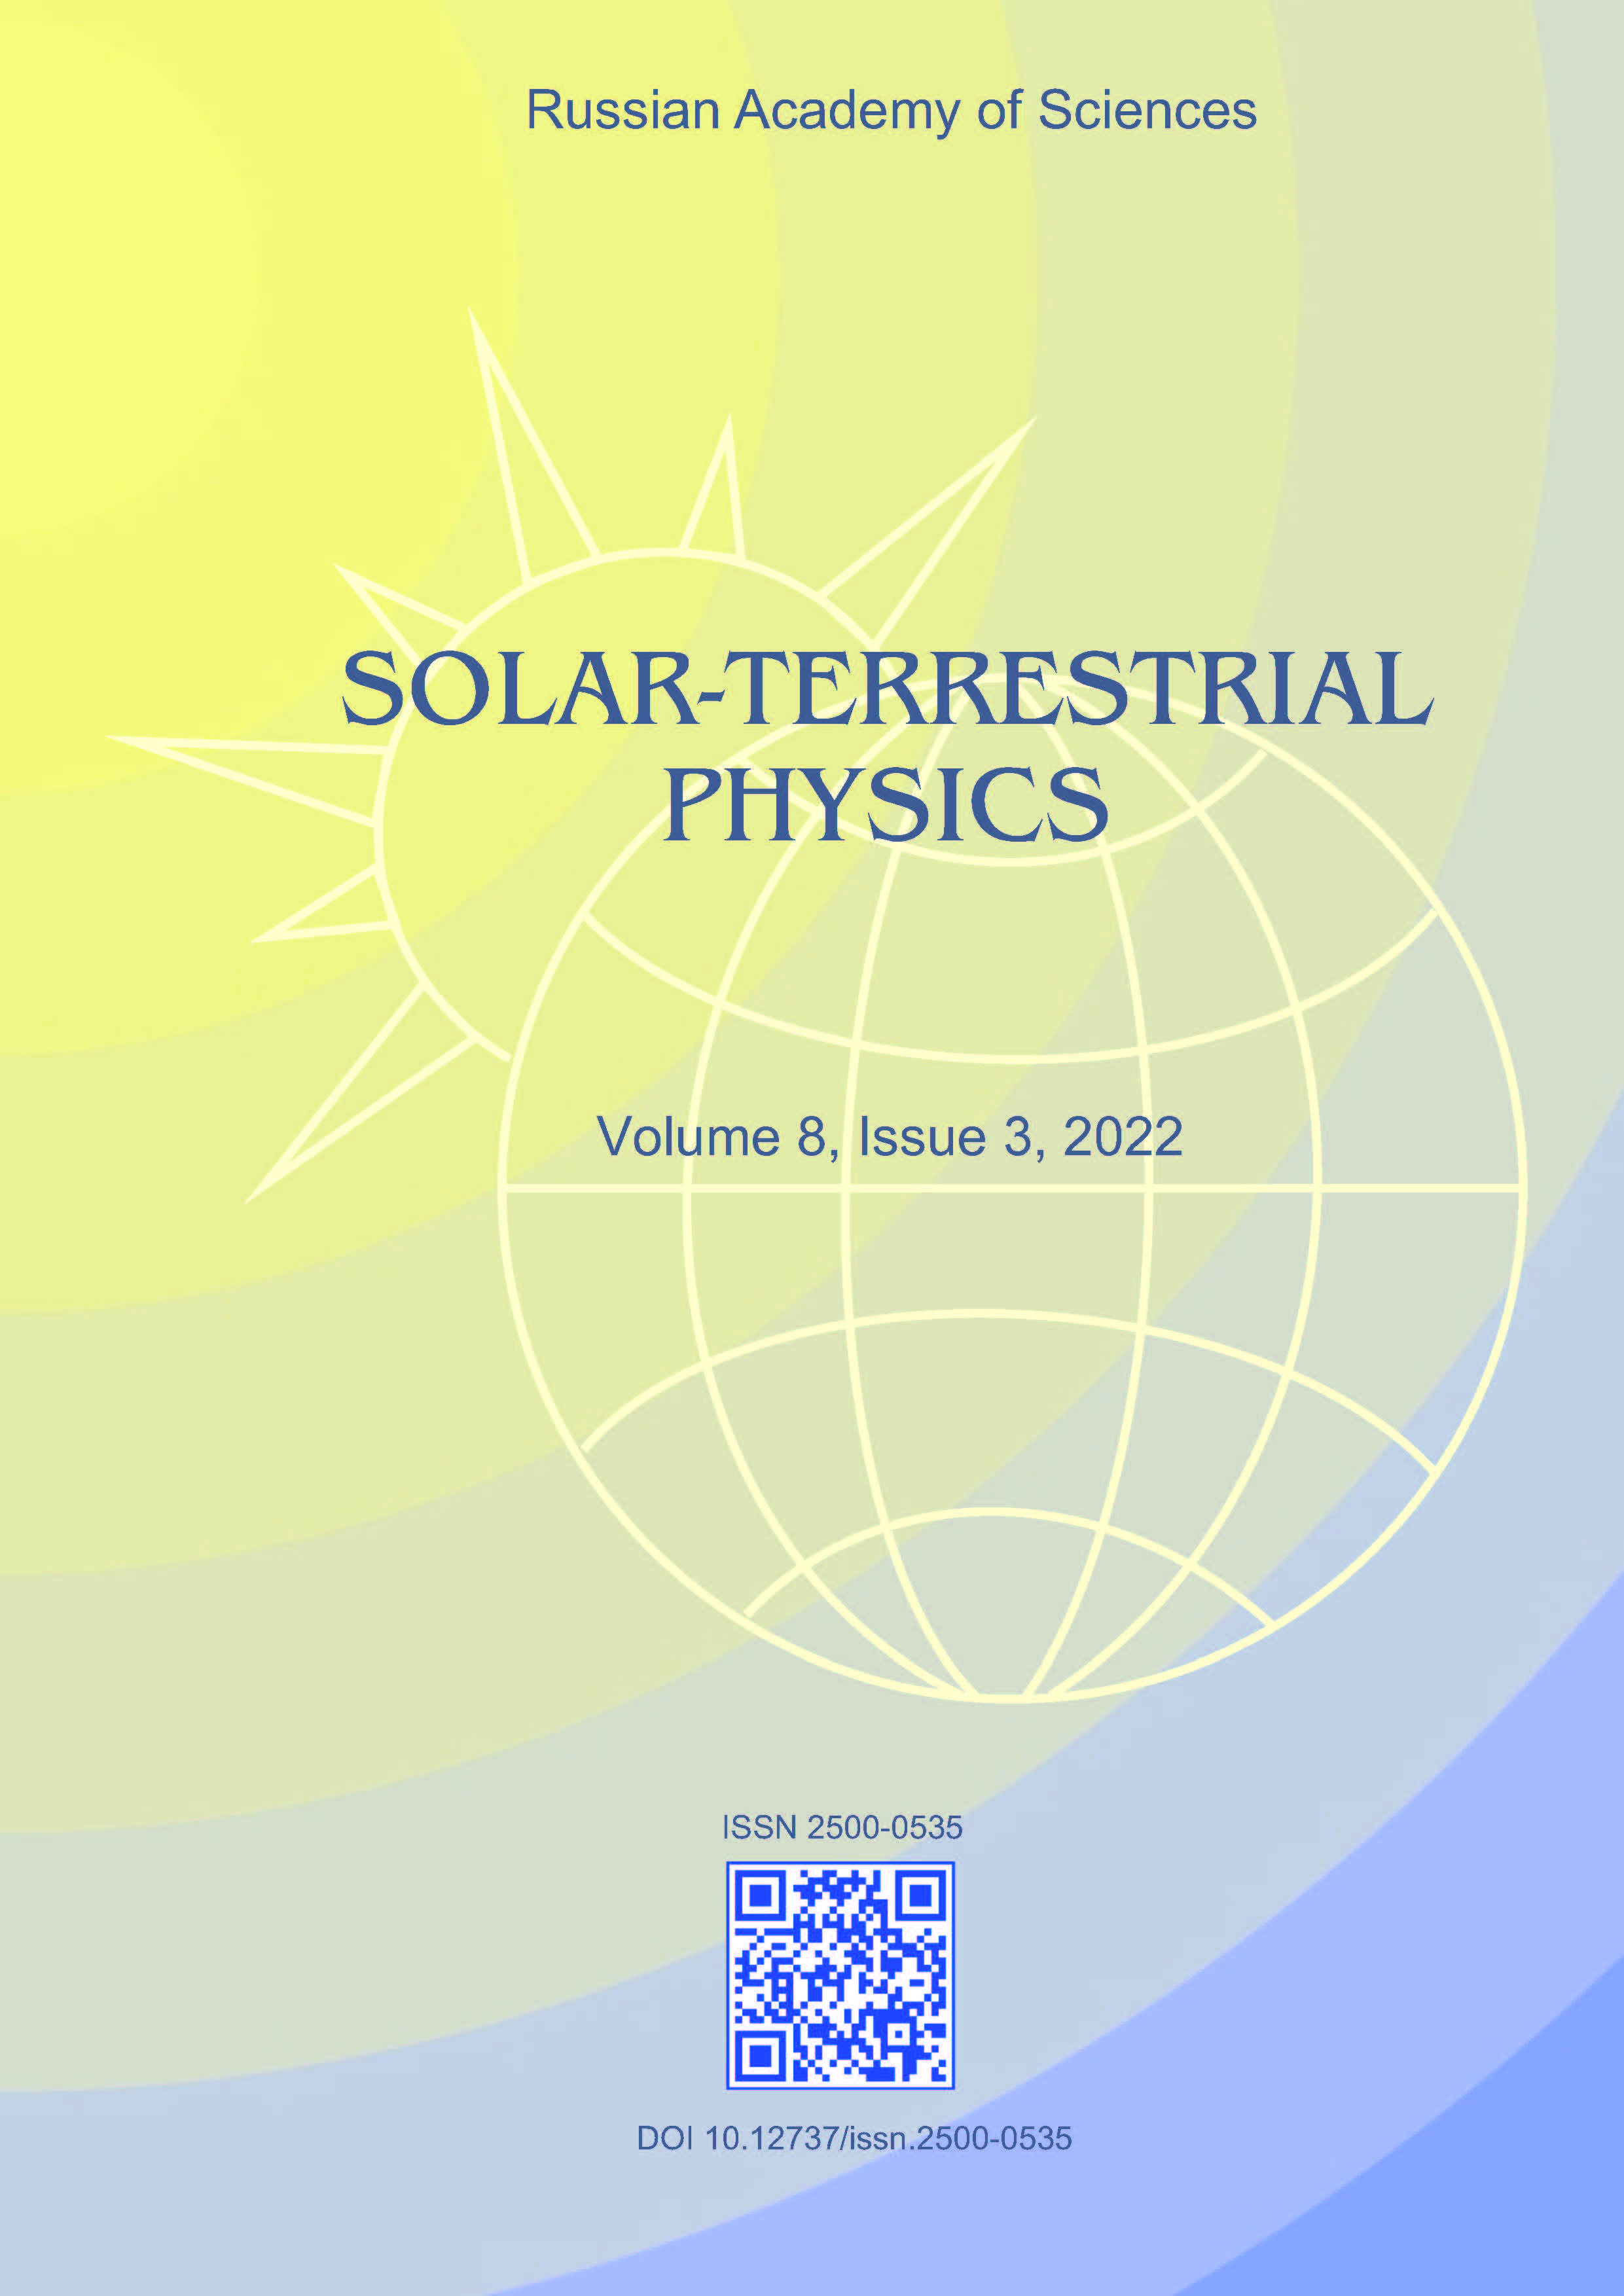                         Topside ionosphere during solar cosmic ray bursts and Forbush decreases in galactic cosmic rays
            